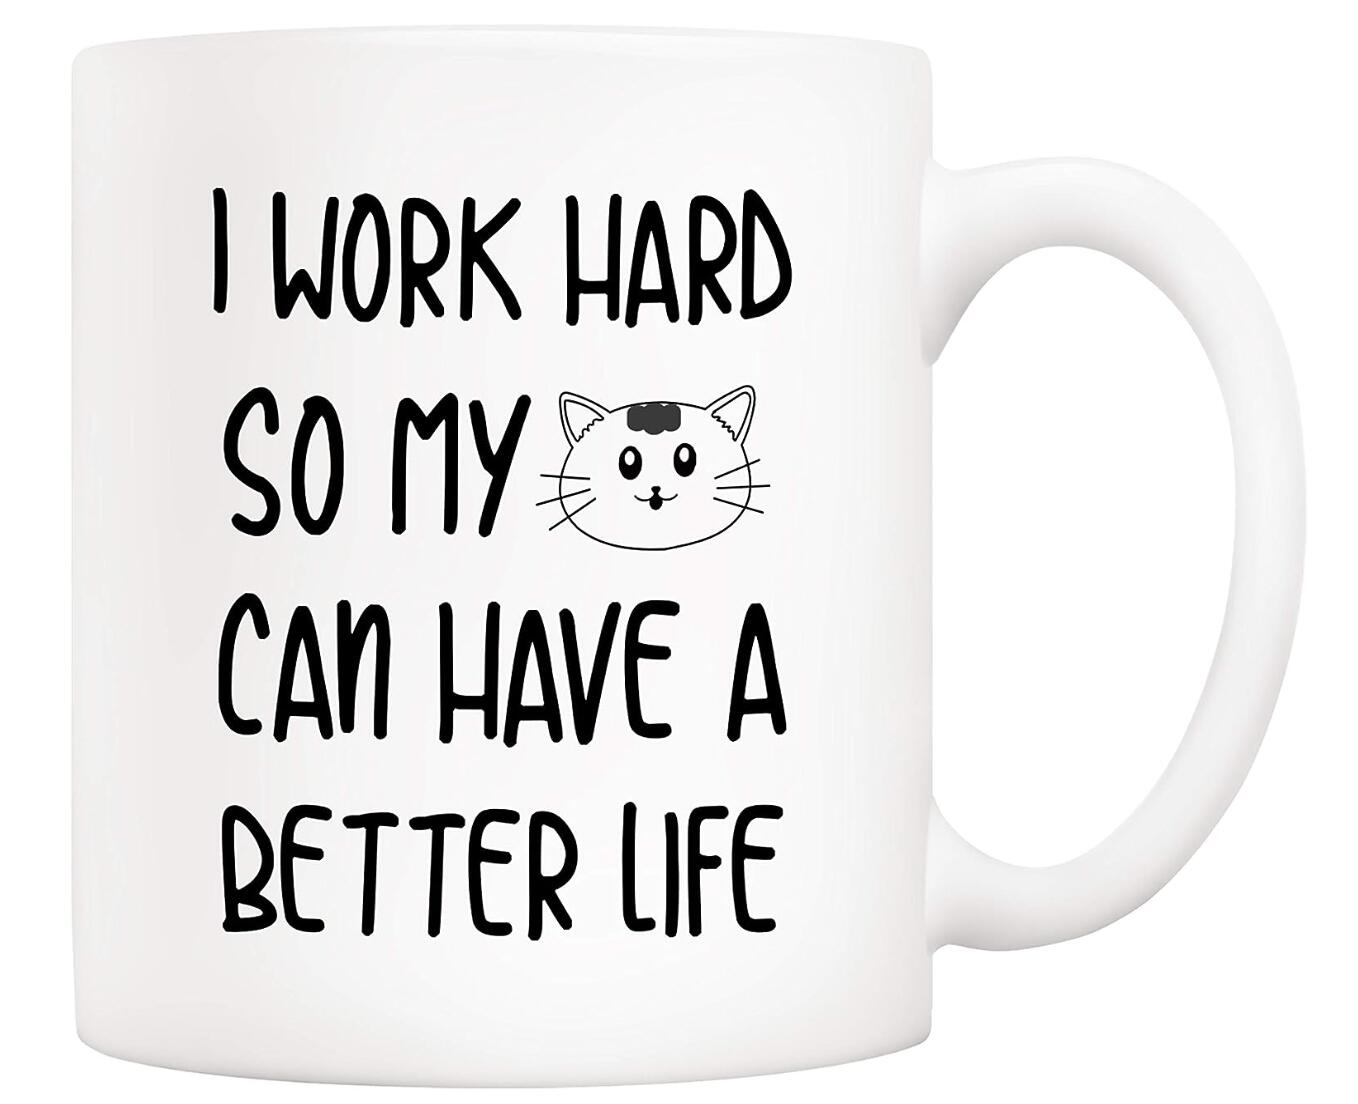 I Work Hard So That My Cat Can Have A Better Life Coffee Mug Pet Lovers Gift Cup